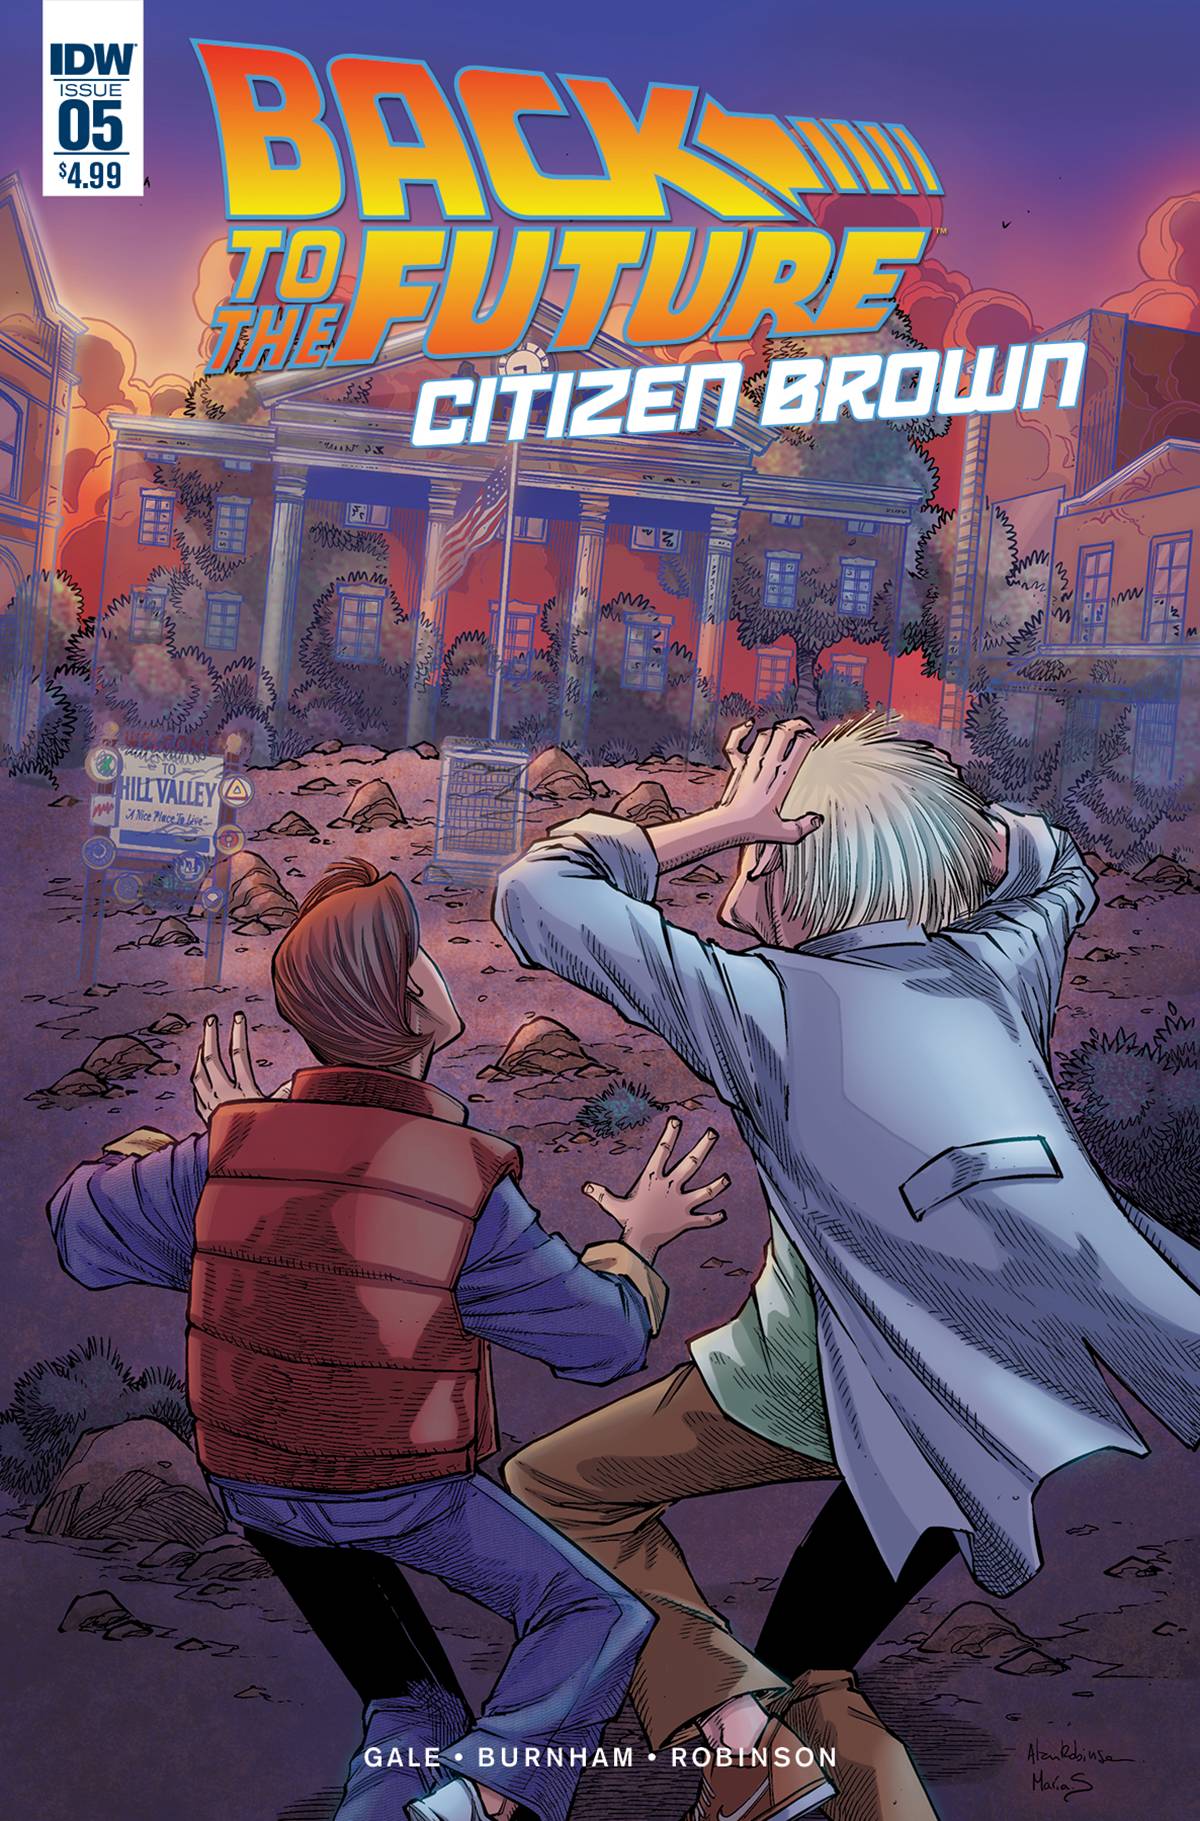 Back To the Future Citizen Brown #5